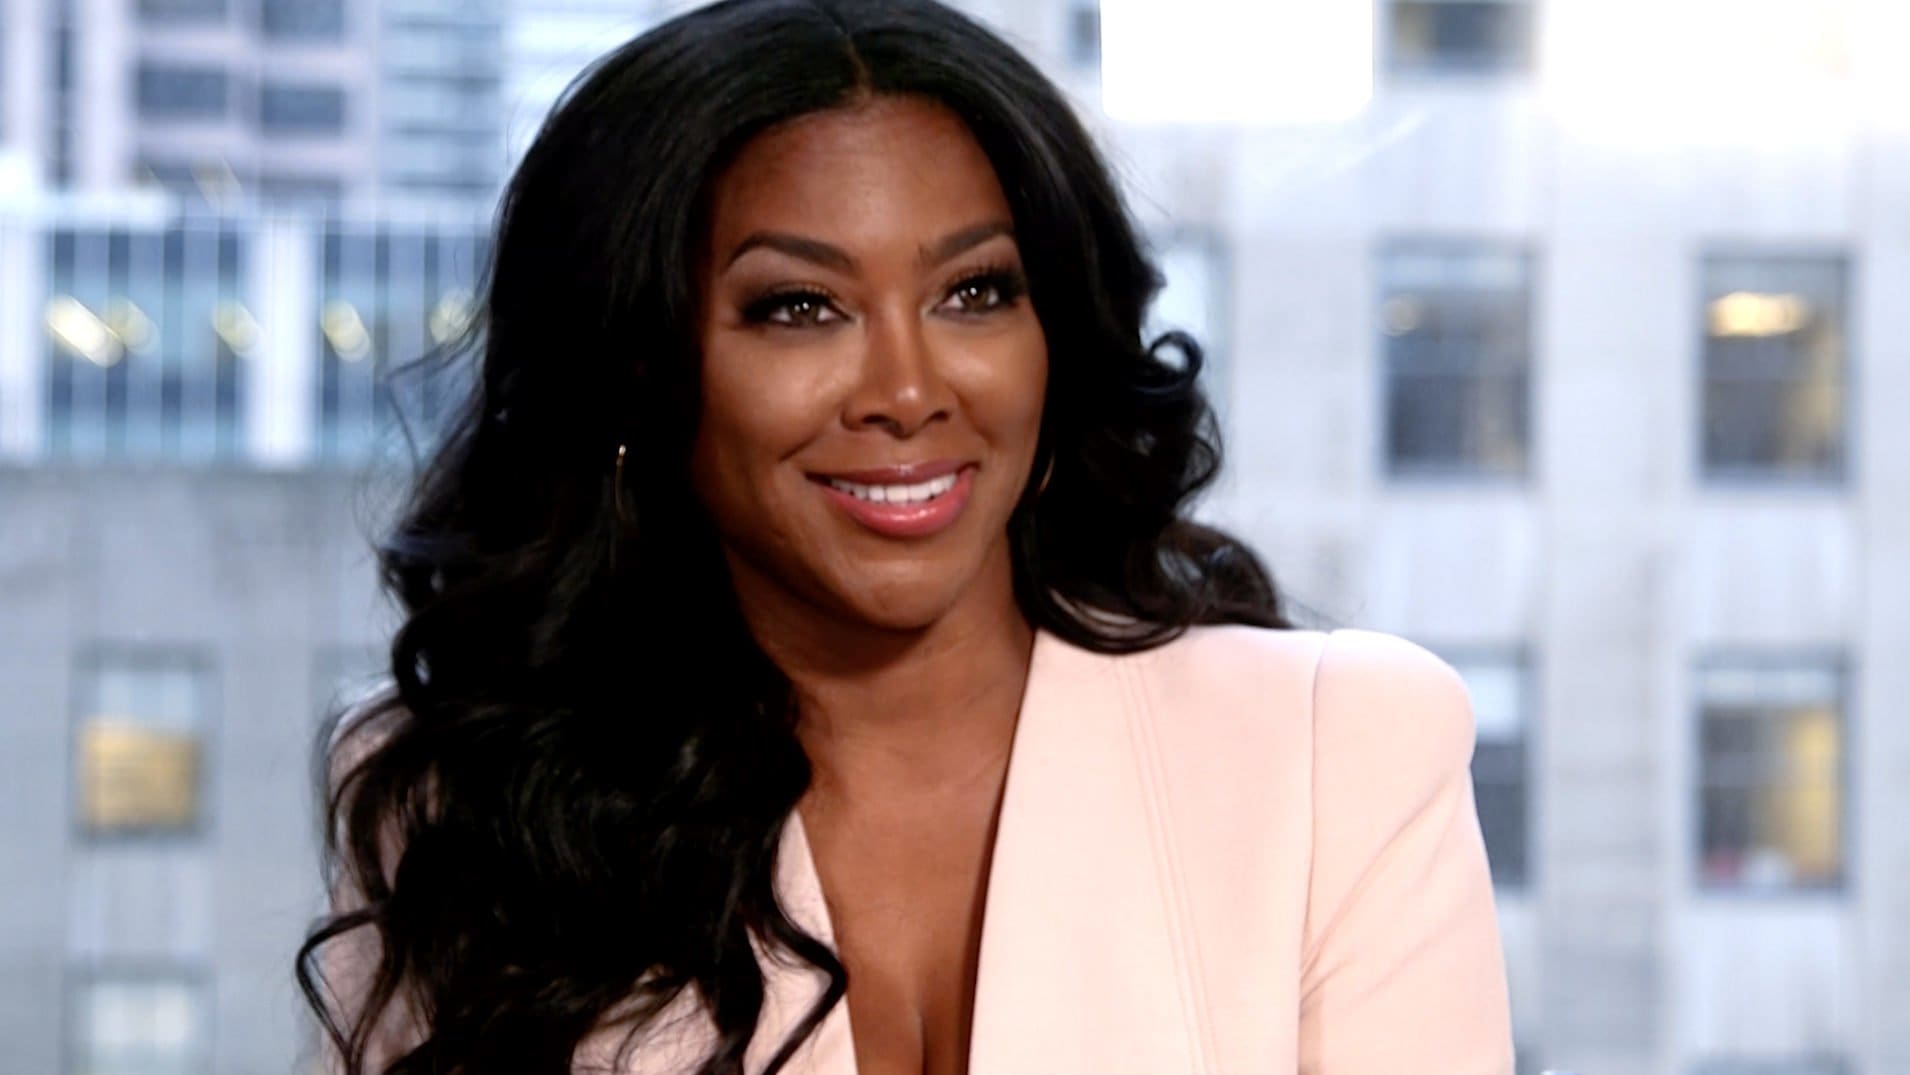 Kenya Moore Is Grateful To The Real Daytime For Making Her Feel Welcomed - See The Gorgeous Pics